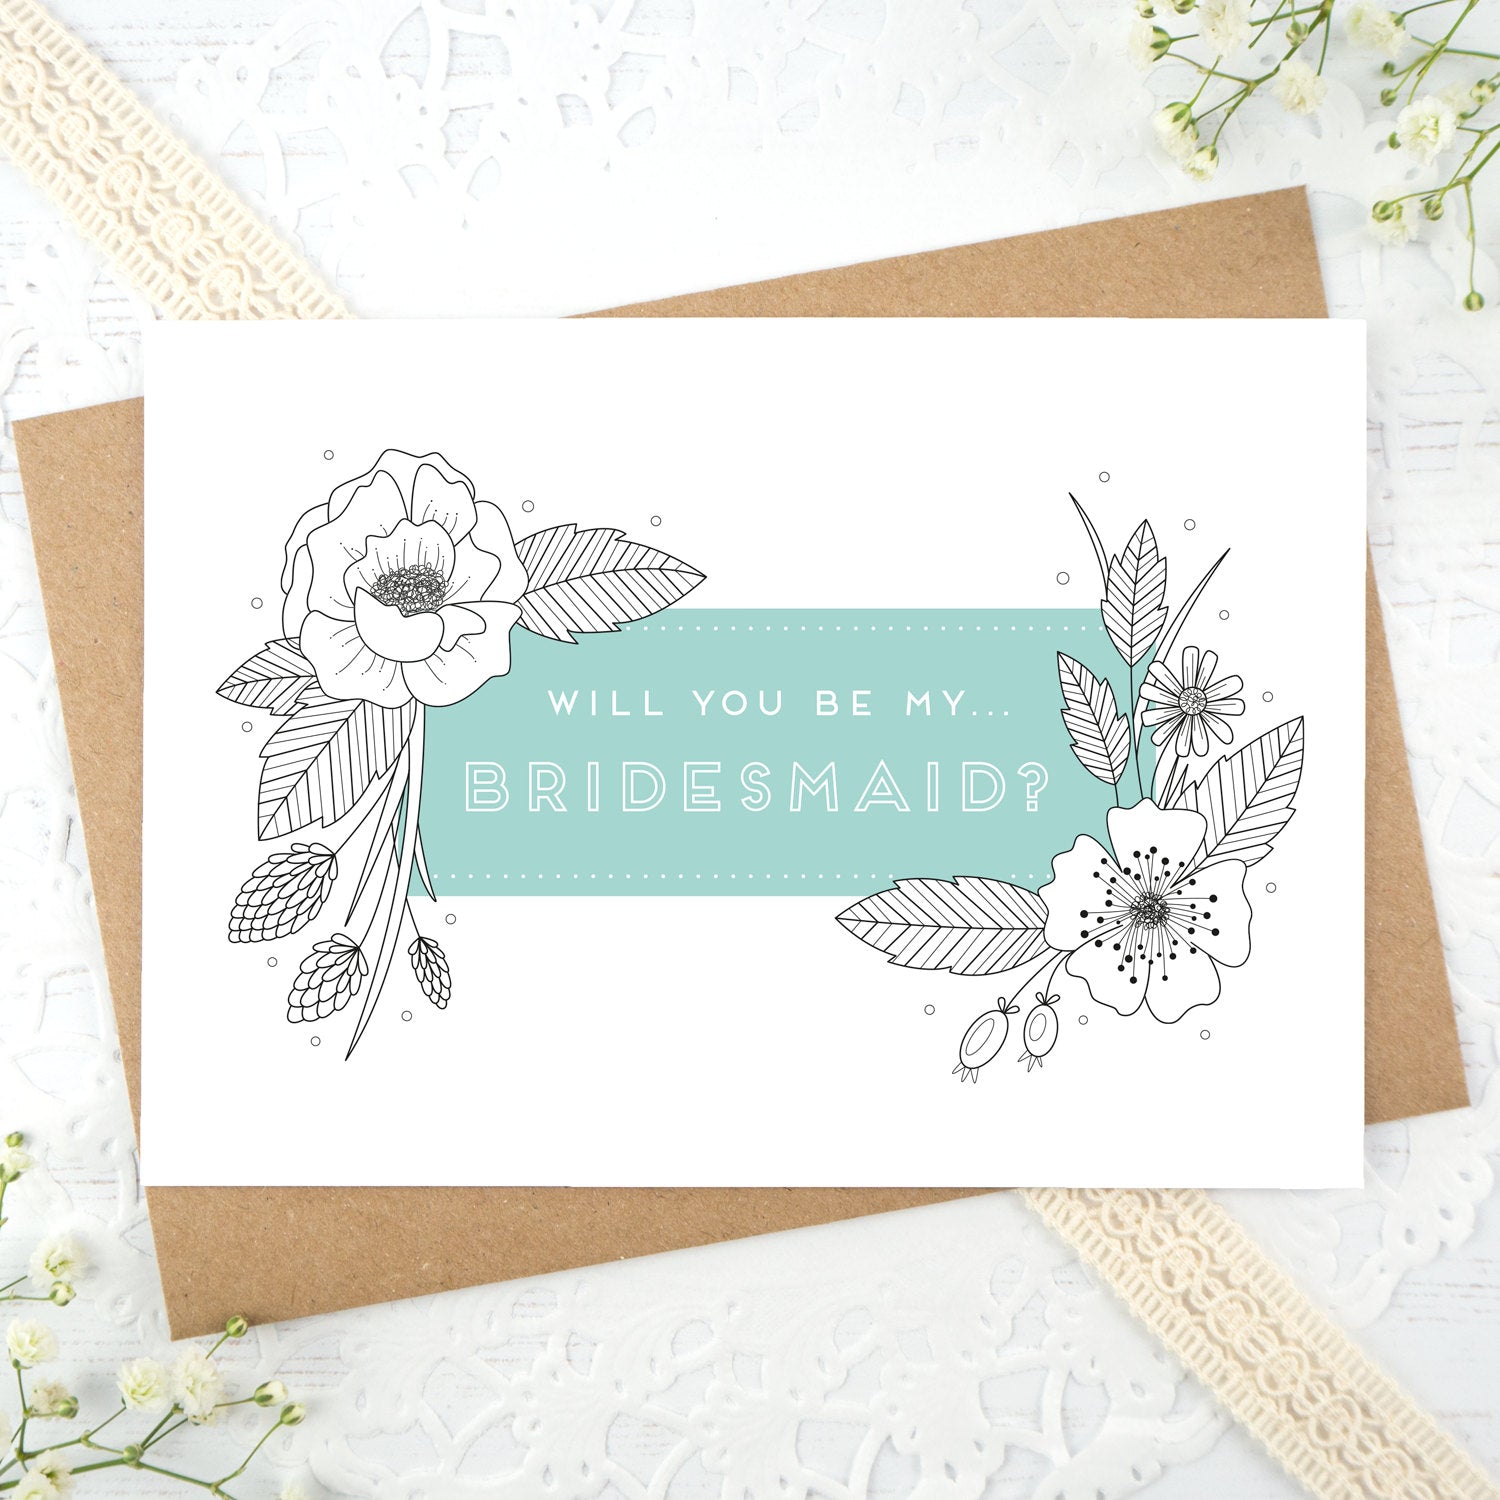 A floral outline, will you be my bridesmaid card in blue